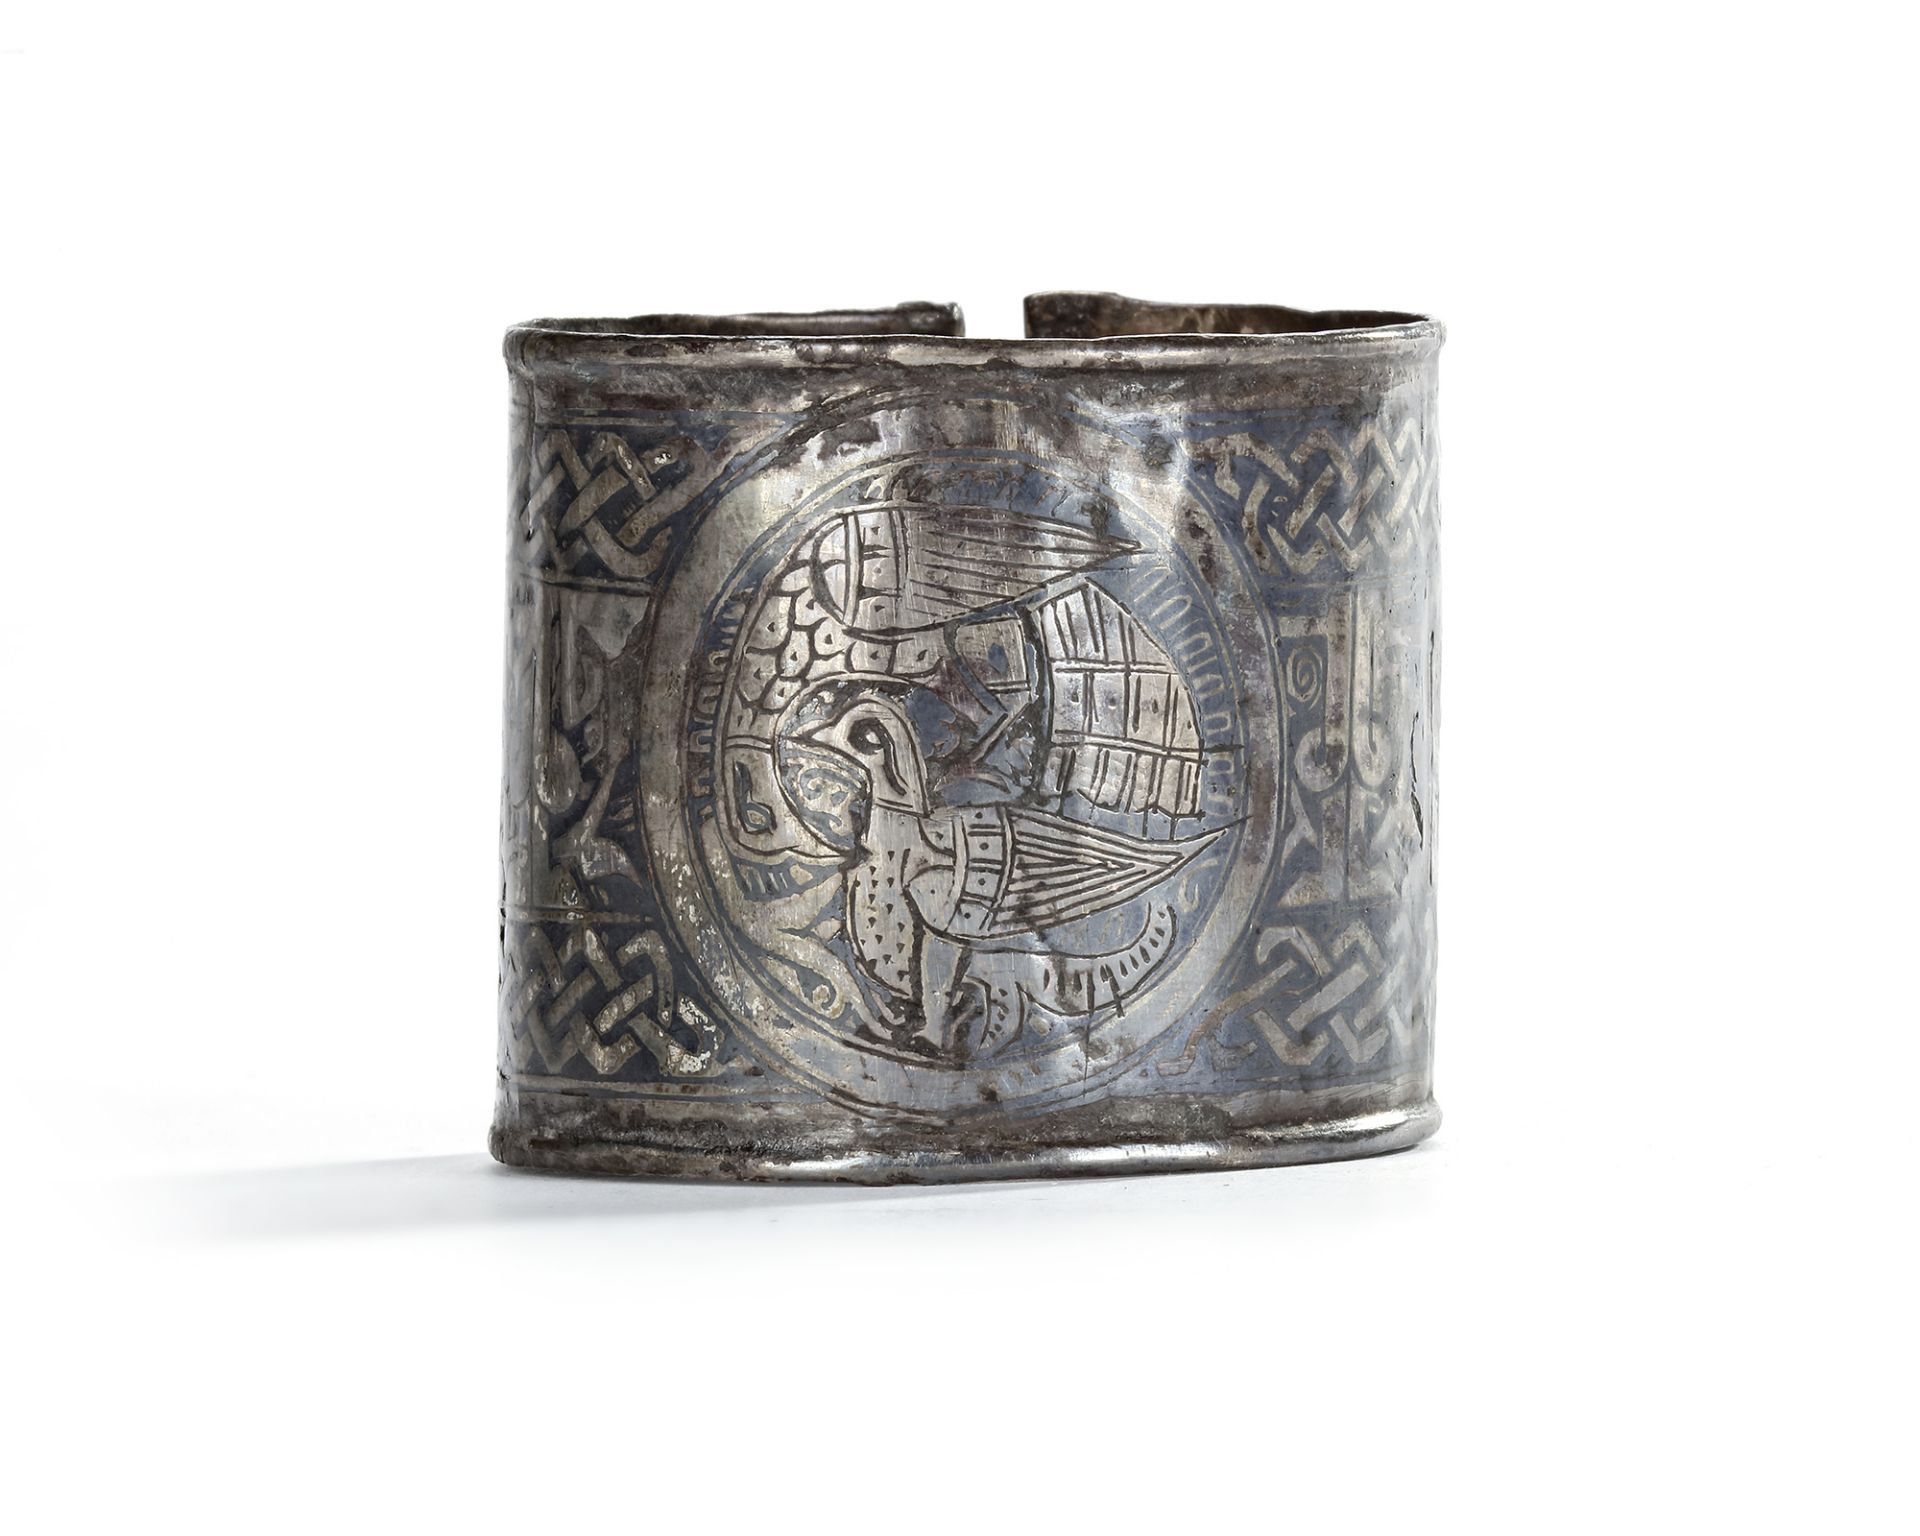 A FATIMID SILVER AND NIELLO BRACELET WITH KUFIC INSCRIPTION, EGYPT OR SYRIA, 11TH-12TH CENTURY